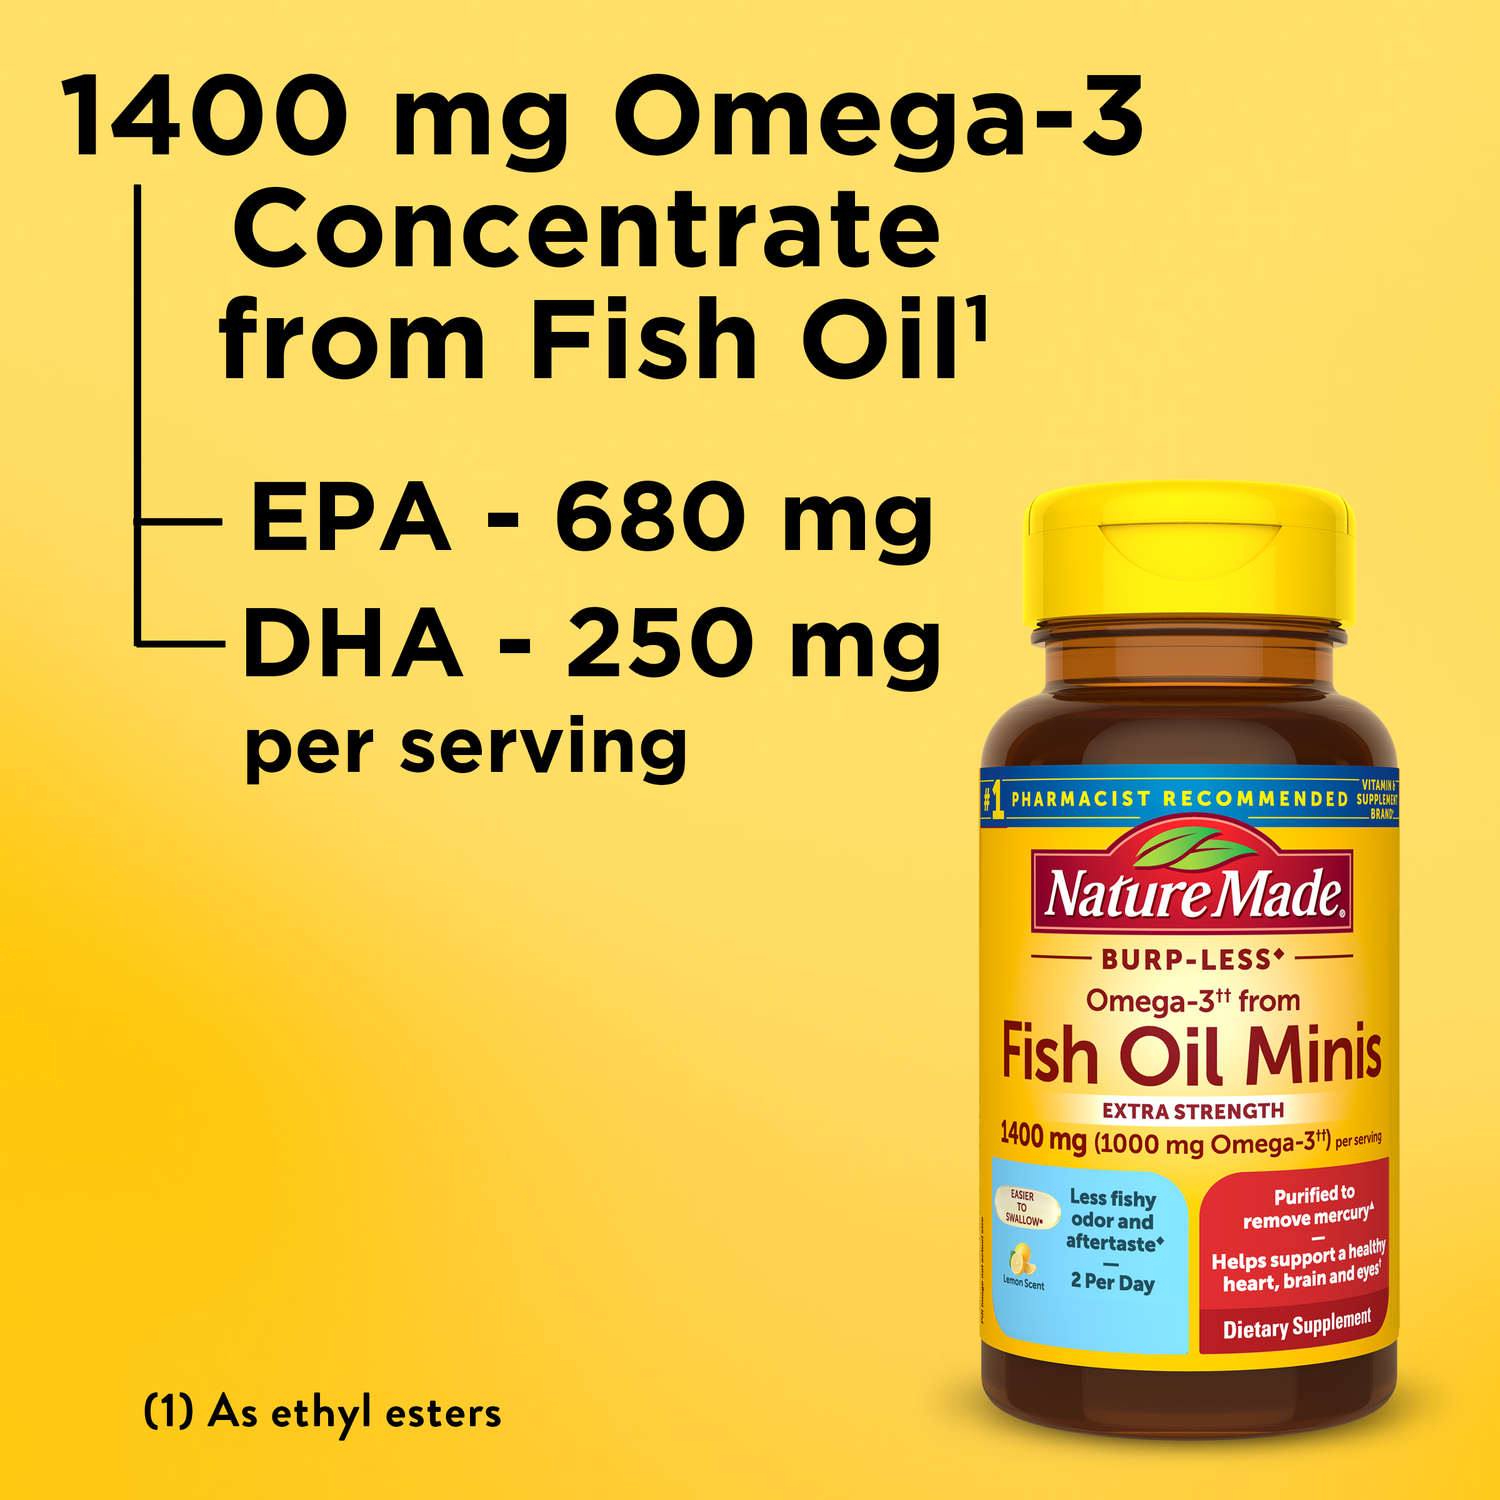 Extra Strength Omega-3†† From Fish Oil Minis | 